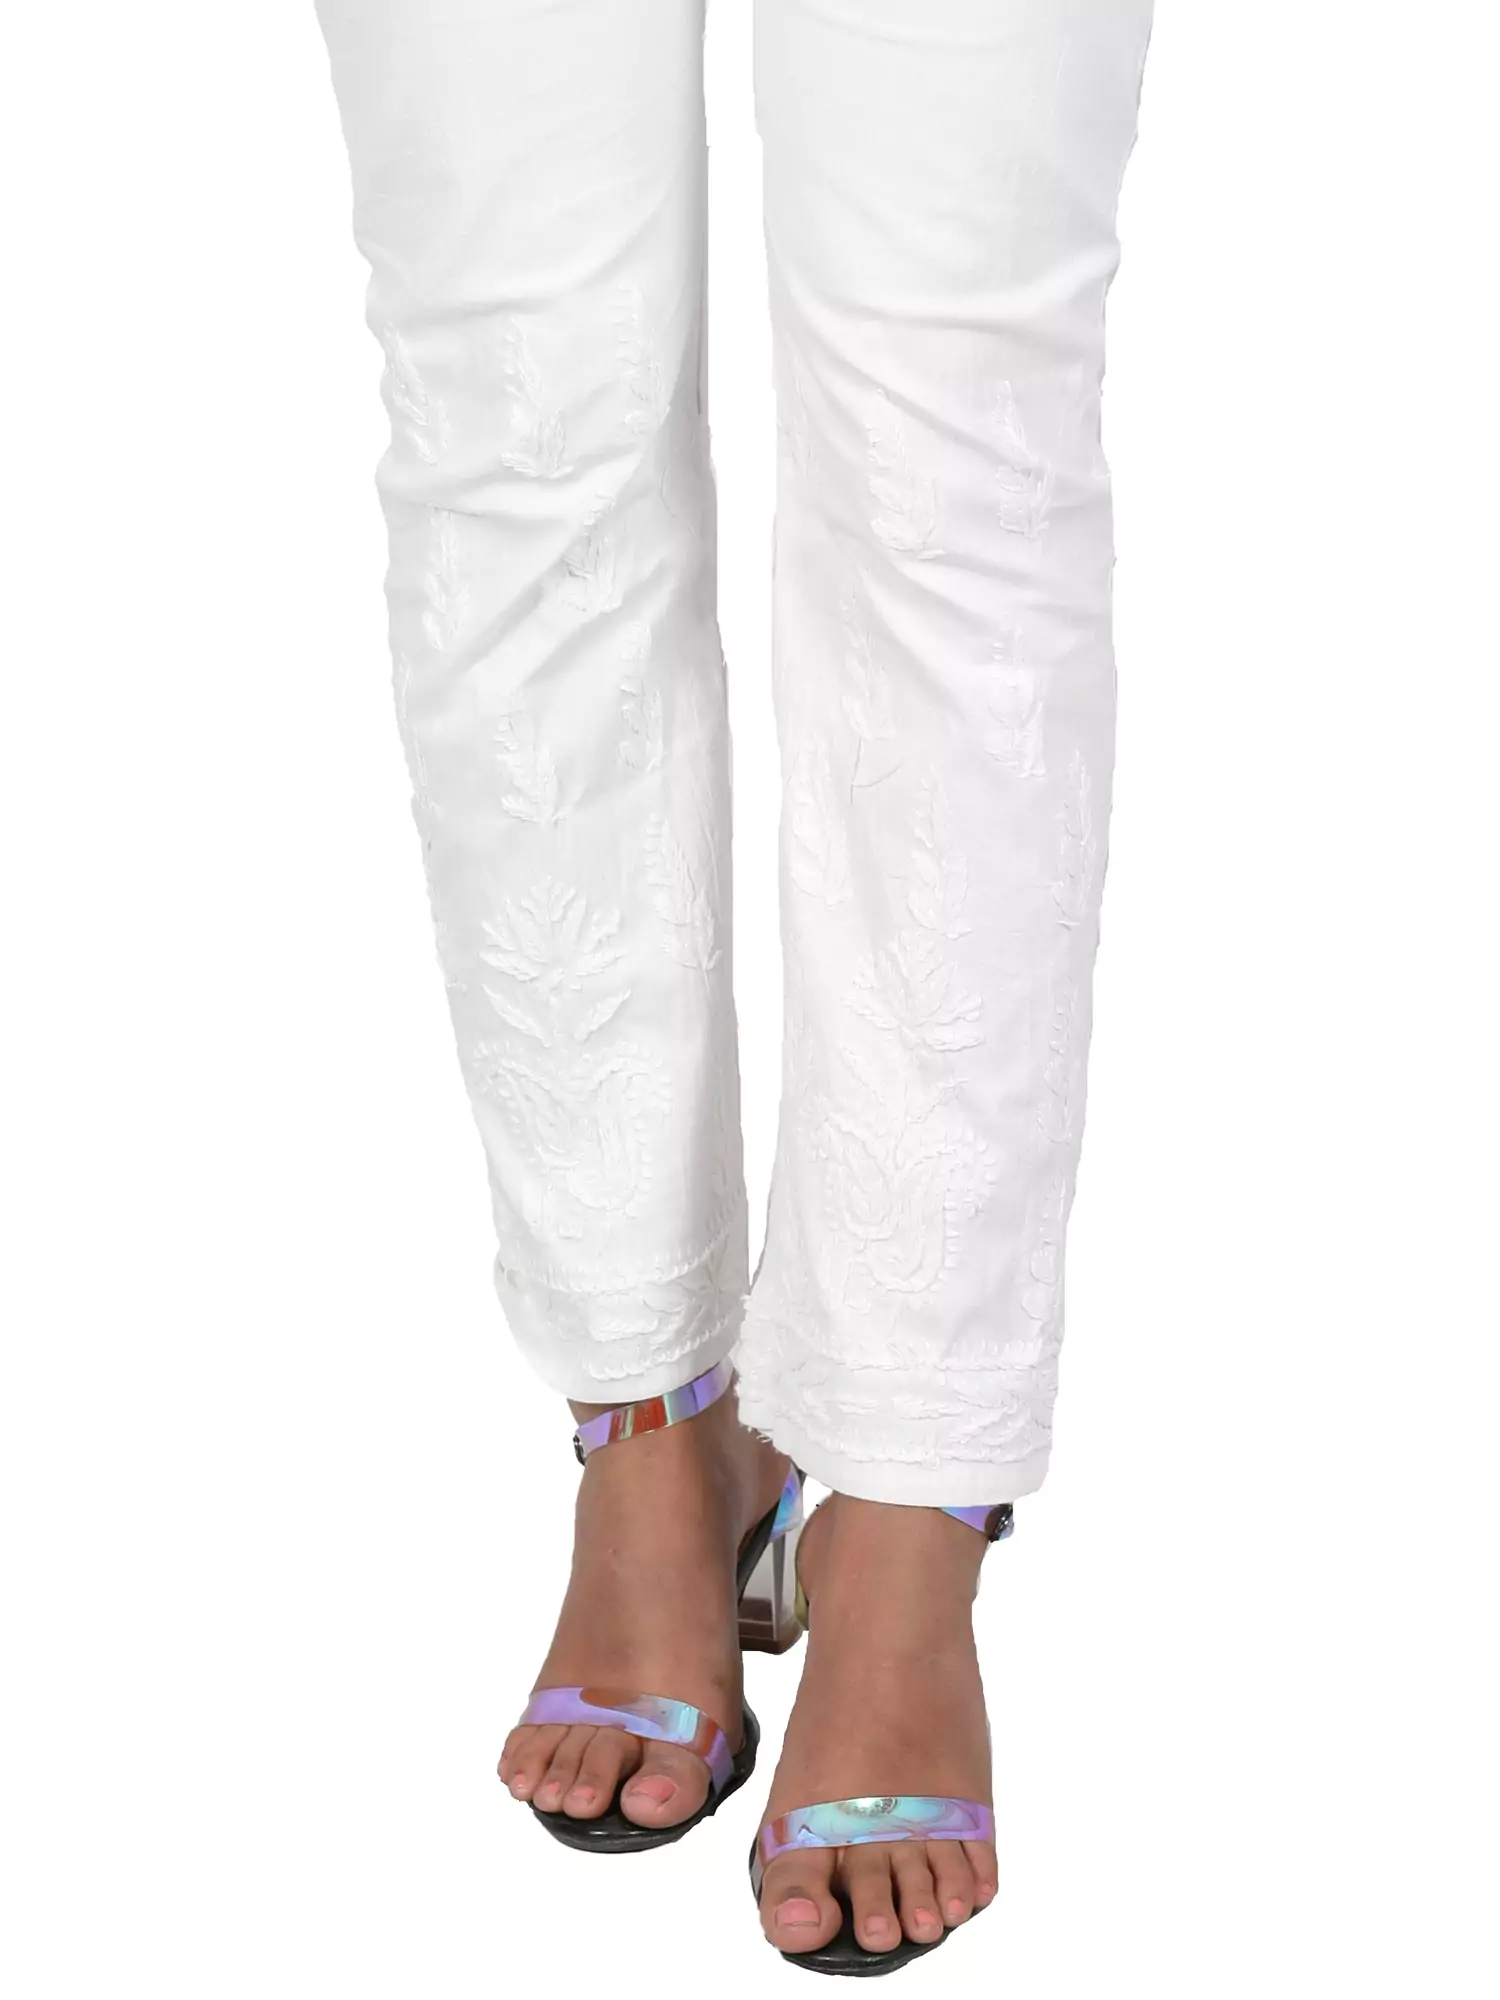 Lavangi Women Lucknow Chikan Hand Embroidery White Cotton Stretchable Trousers